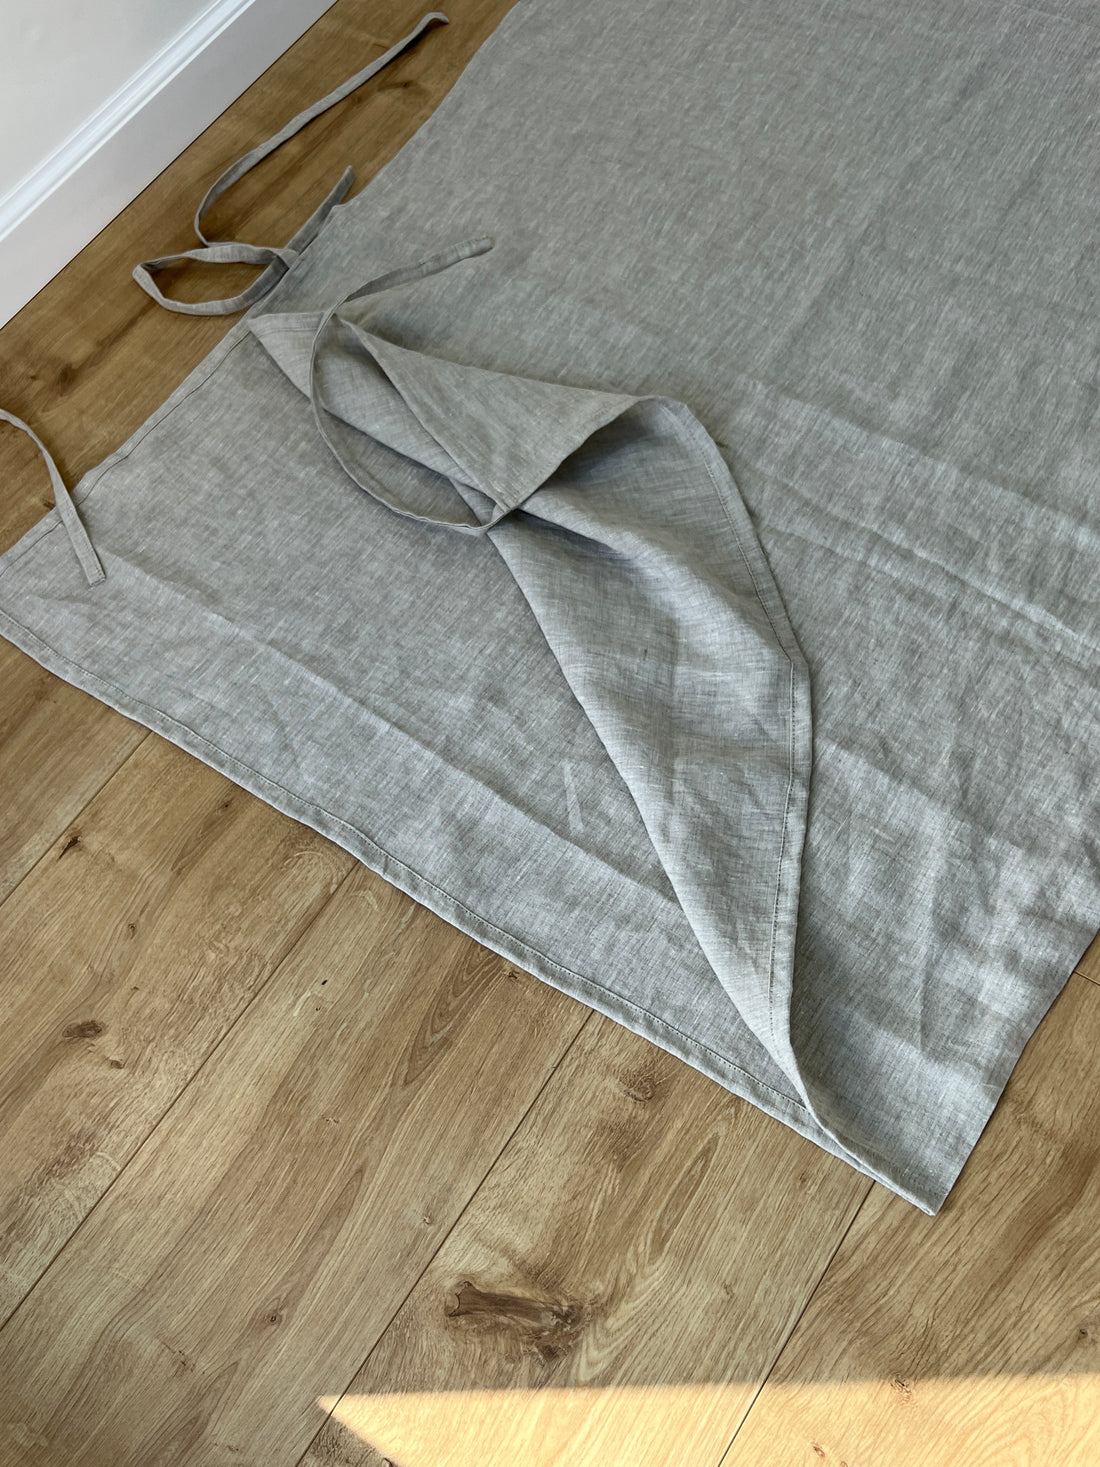 Linen Single Sleeping Bag Liner for Camping Hiking Hostel Travel non-dyed linen fabric custom made